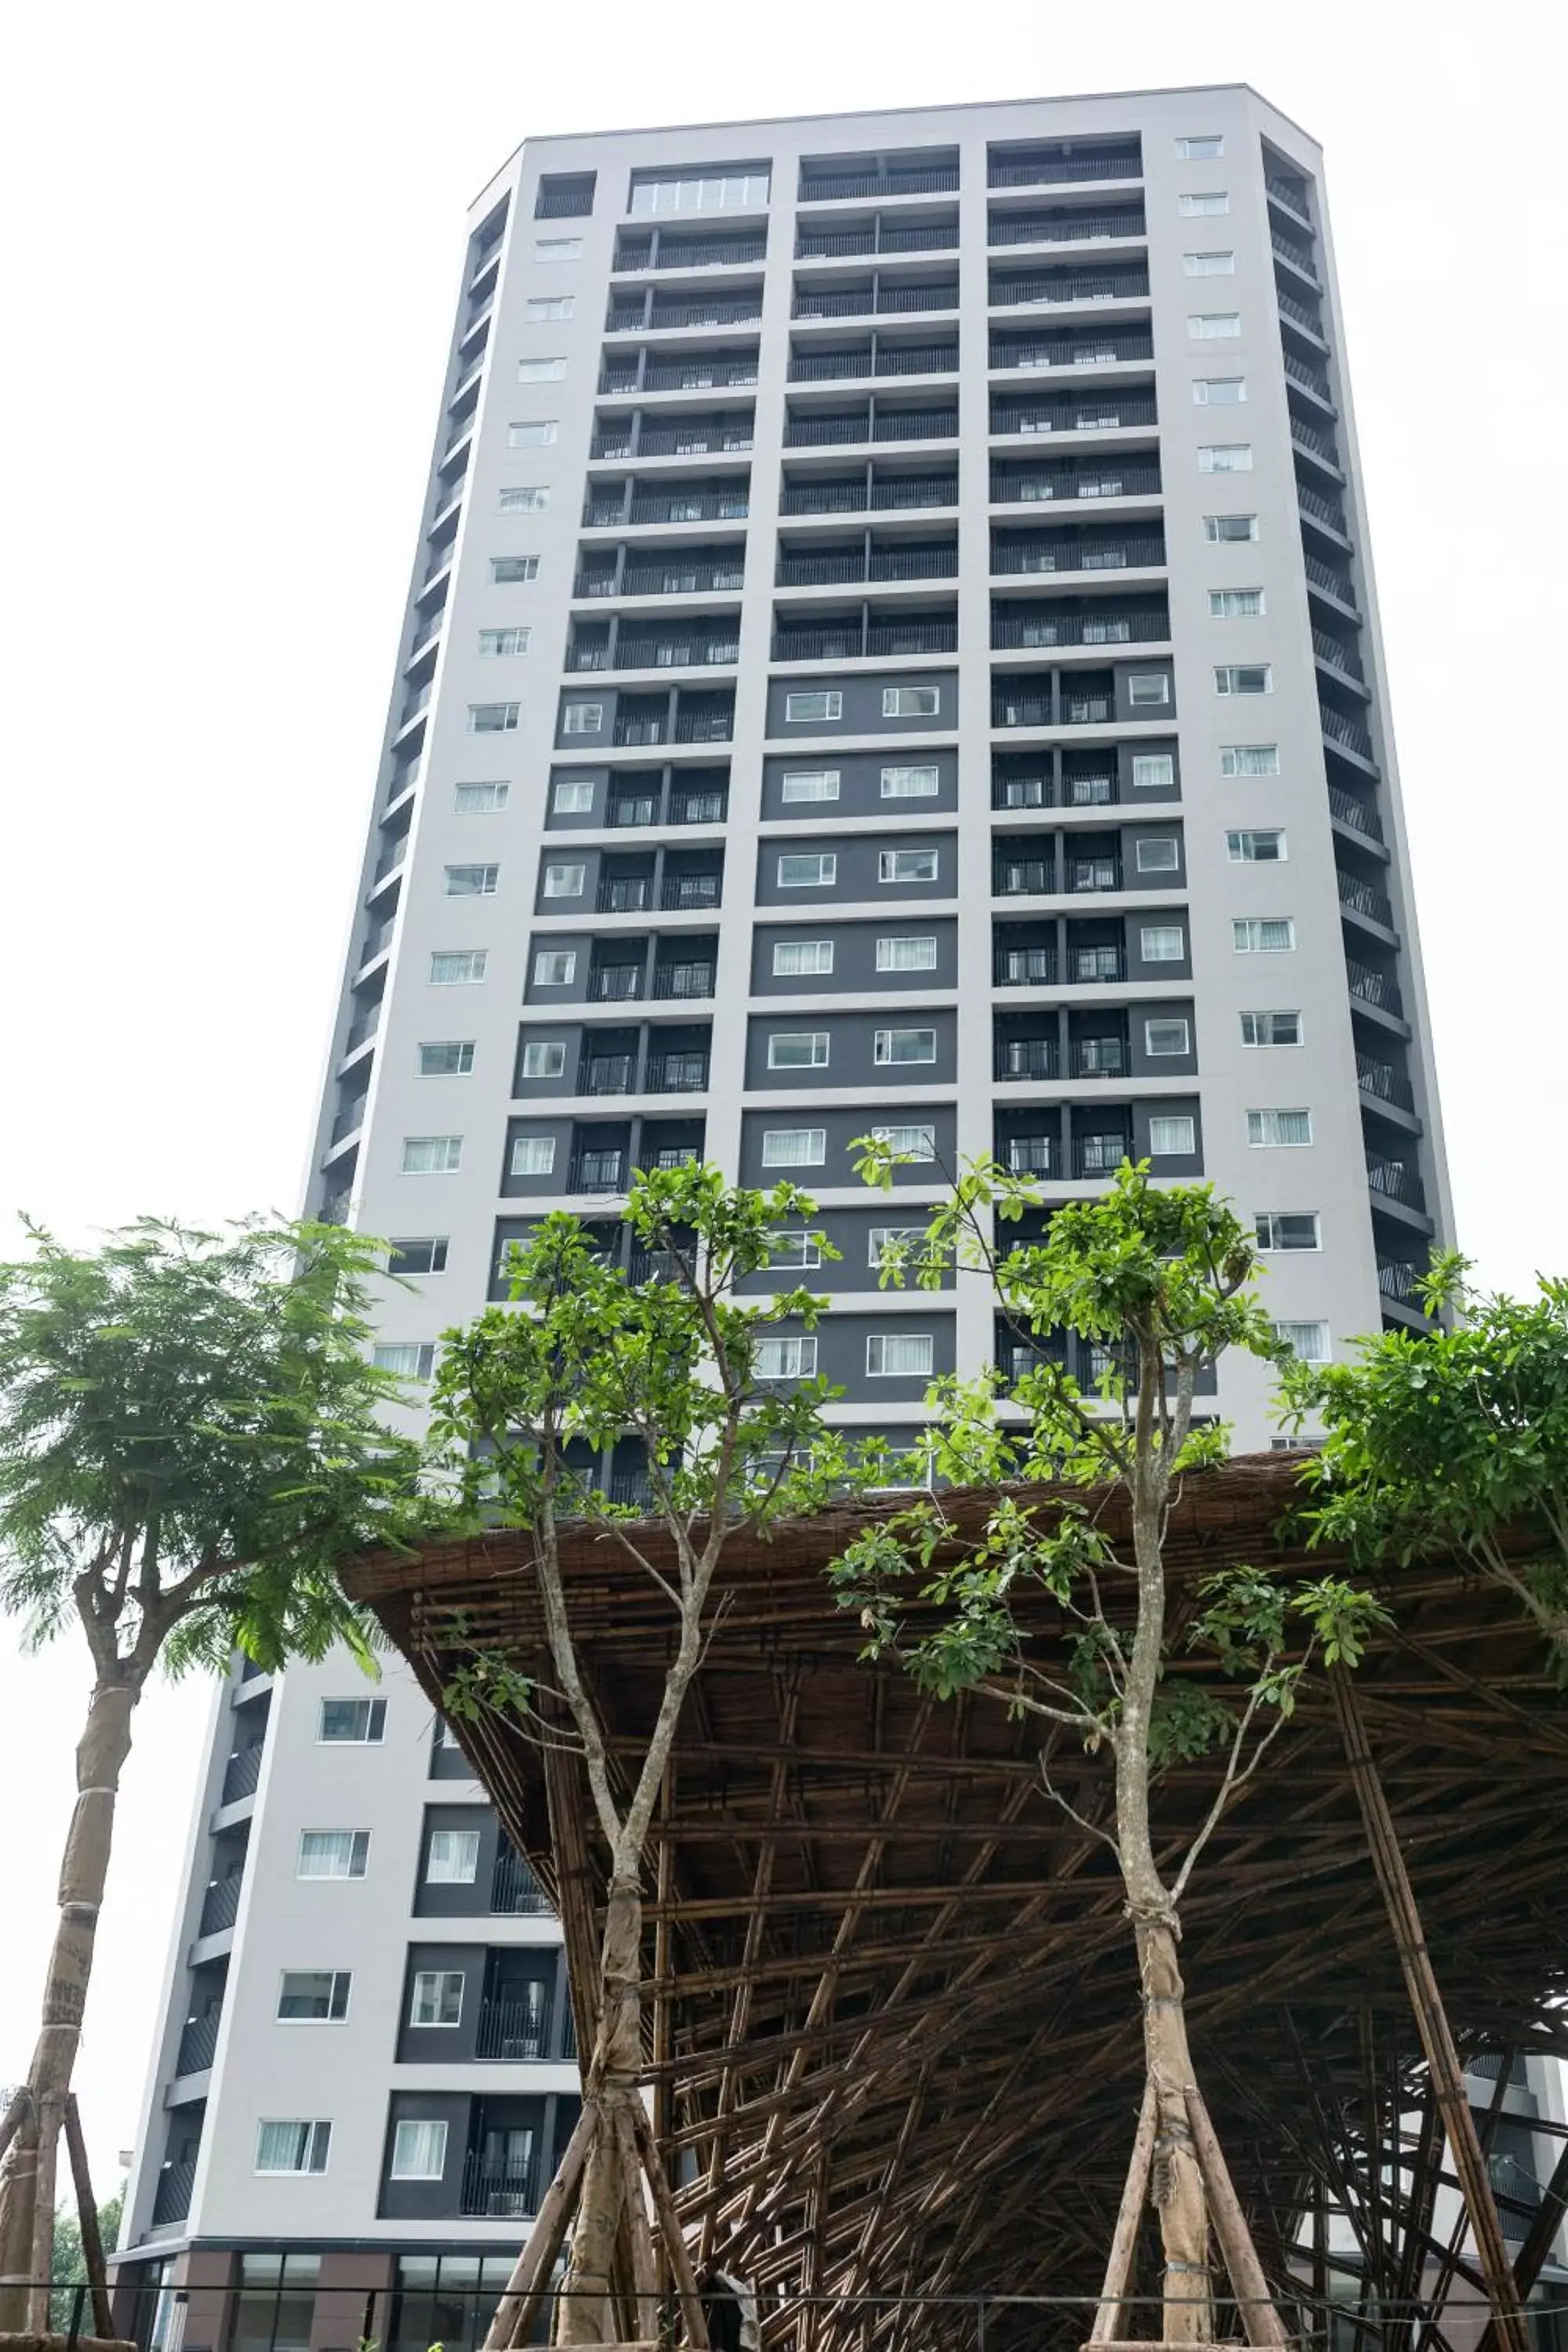 Property Building in Roygent Parks Hanoi